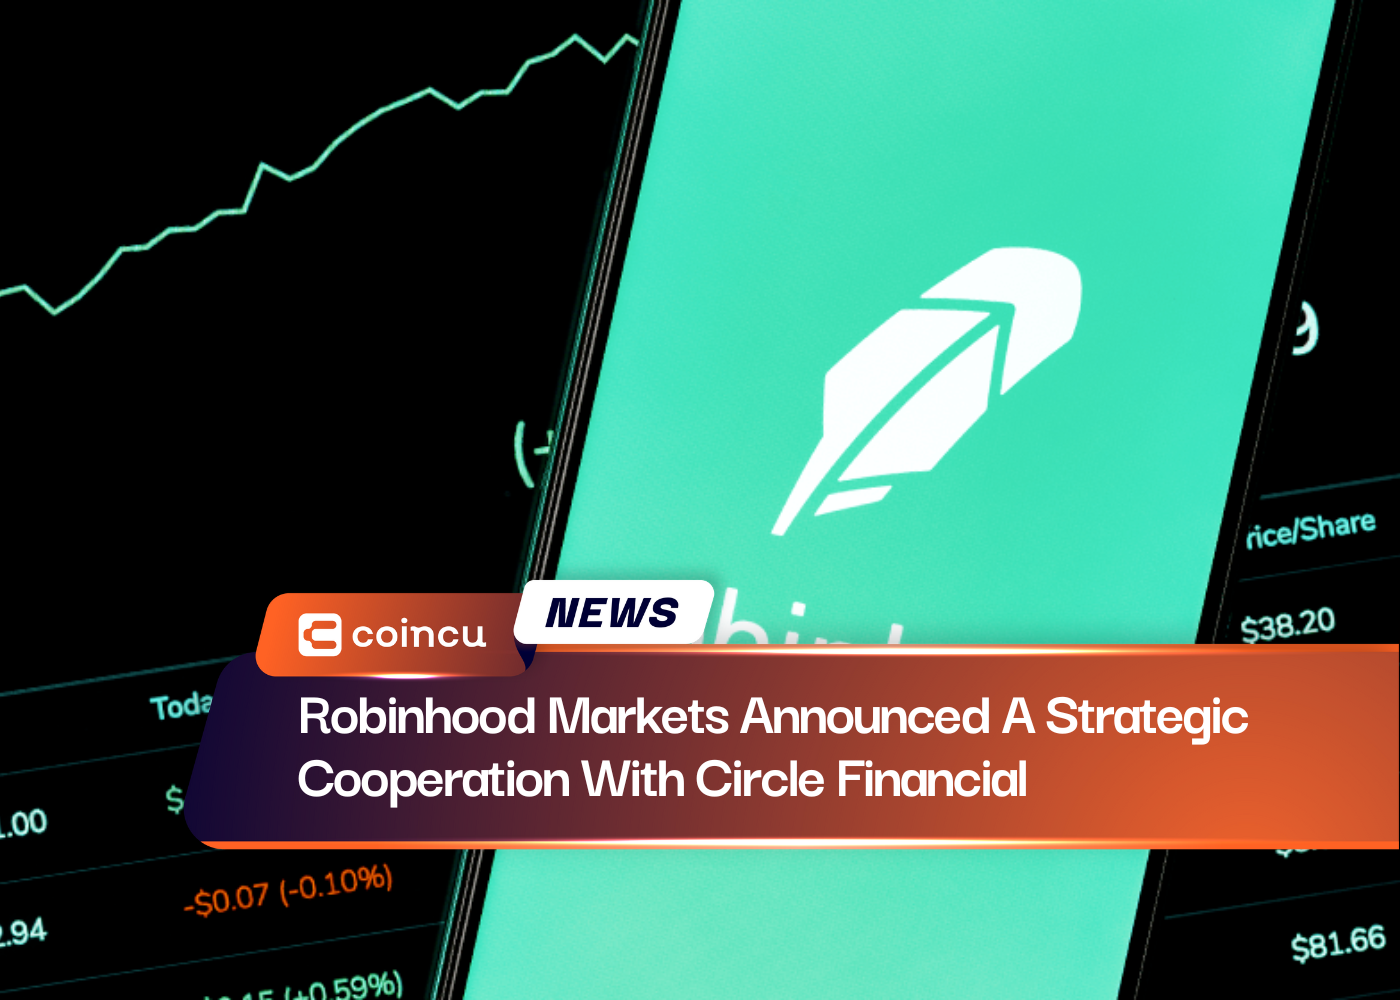 Robinhood Markets Announced A Strategic Cooperation With Circle Financial